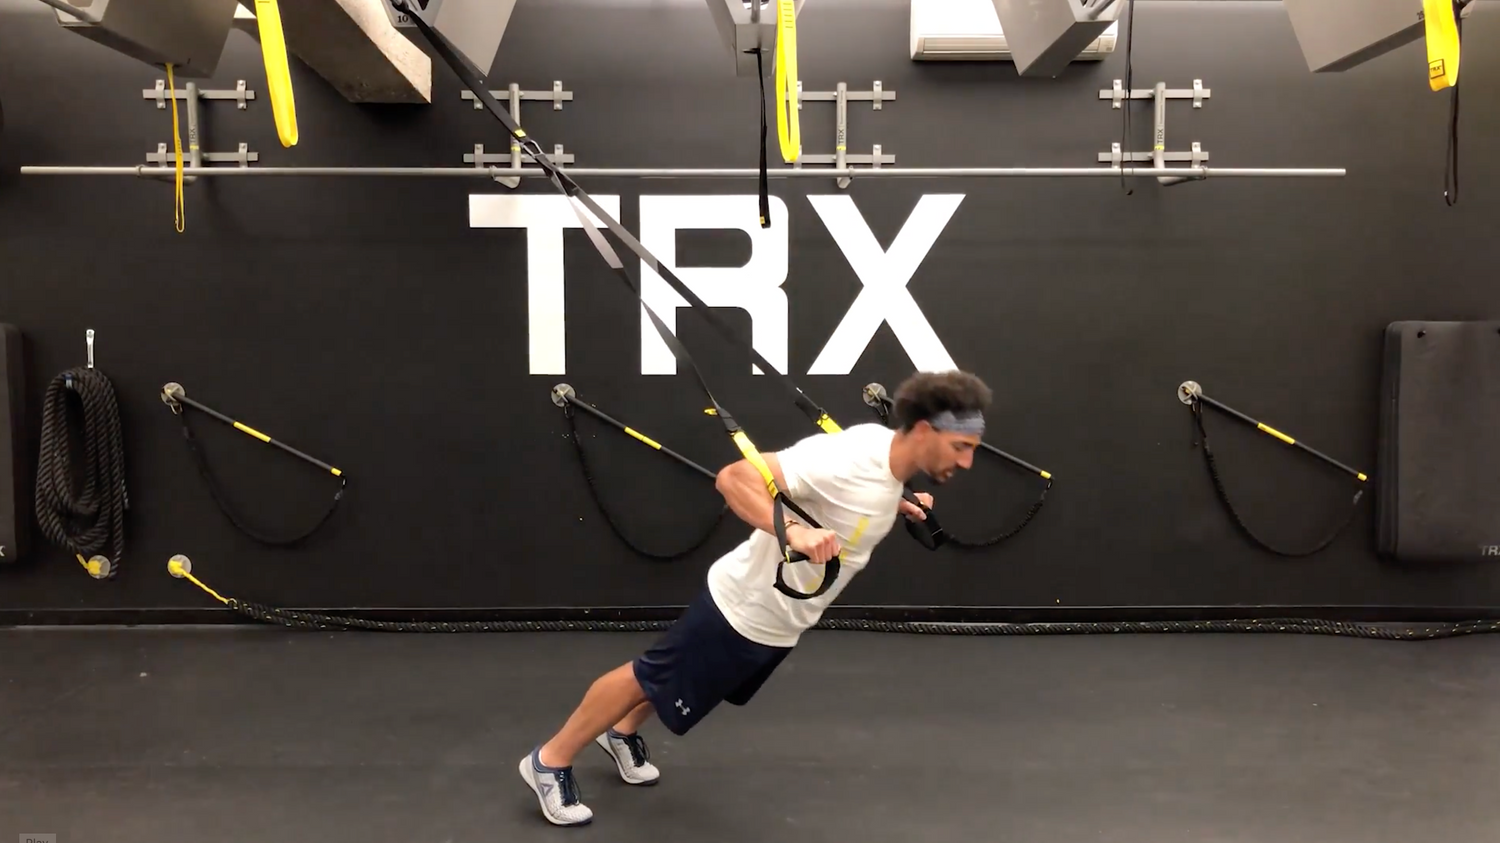 Four TRX Exercises To Improve Your Tennis Game